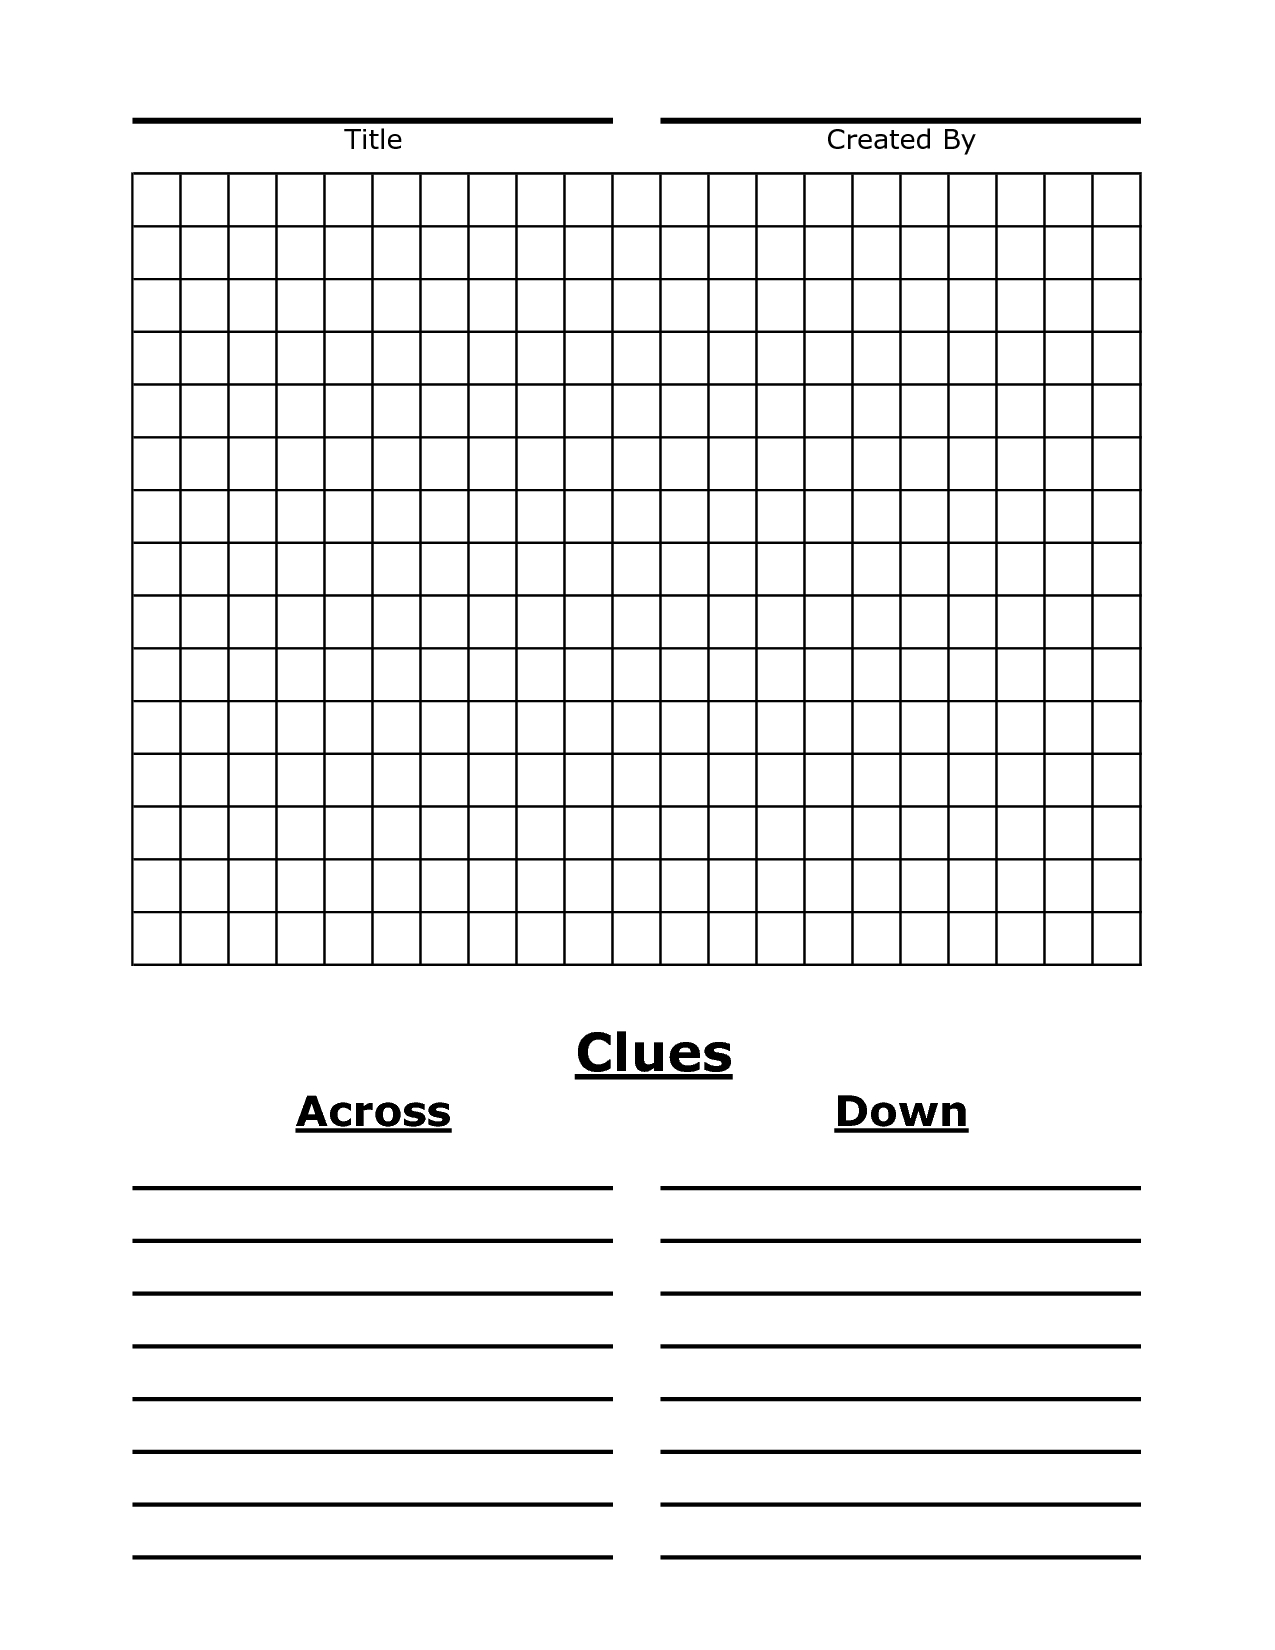 Blank Word Search | 4 Best Images Of Blank Word Search Puzzles - Blank Crossword Puzzle Grids Printable